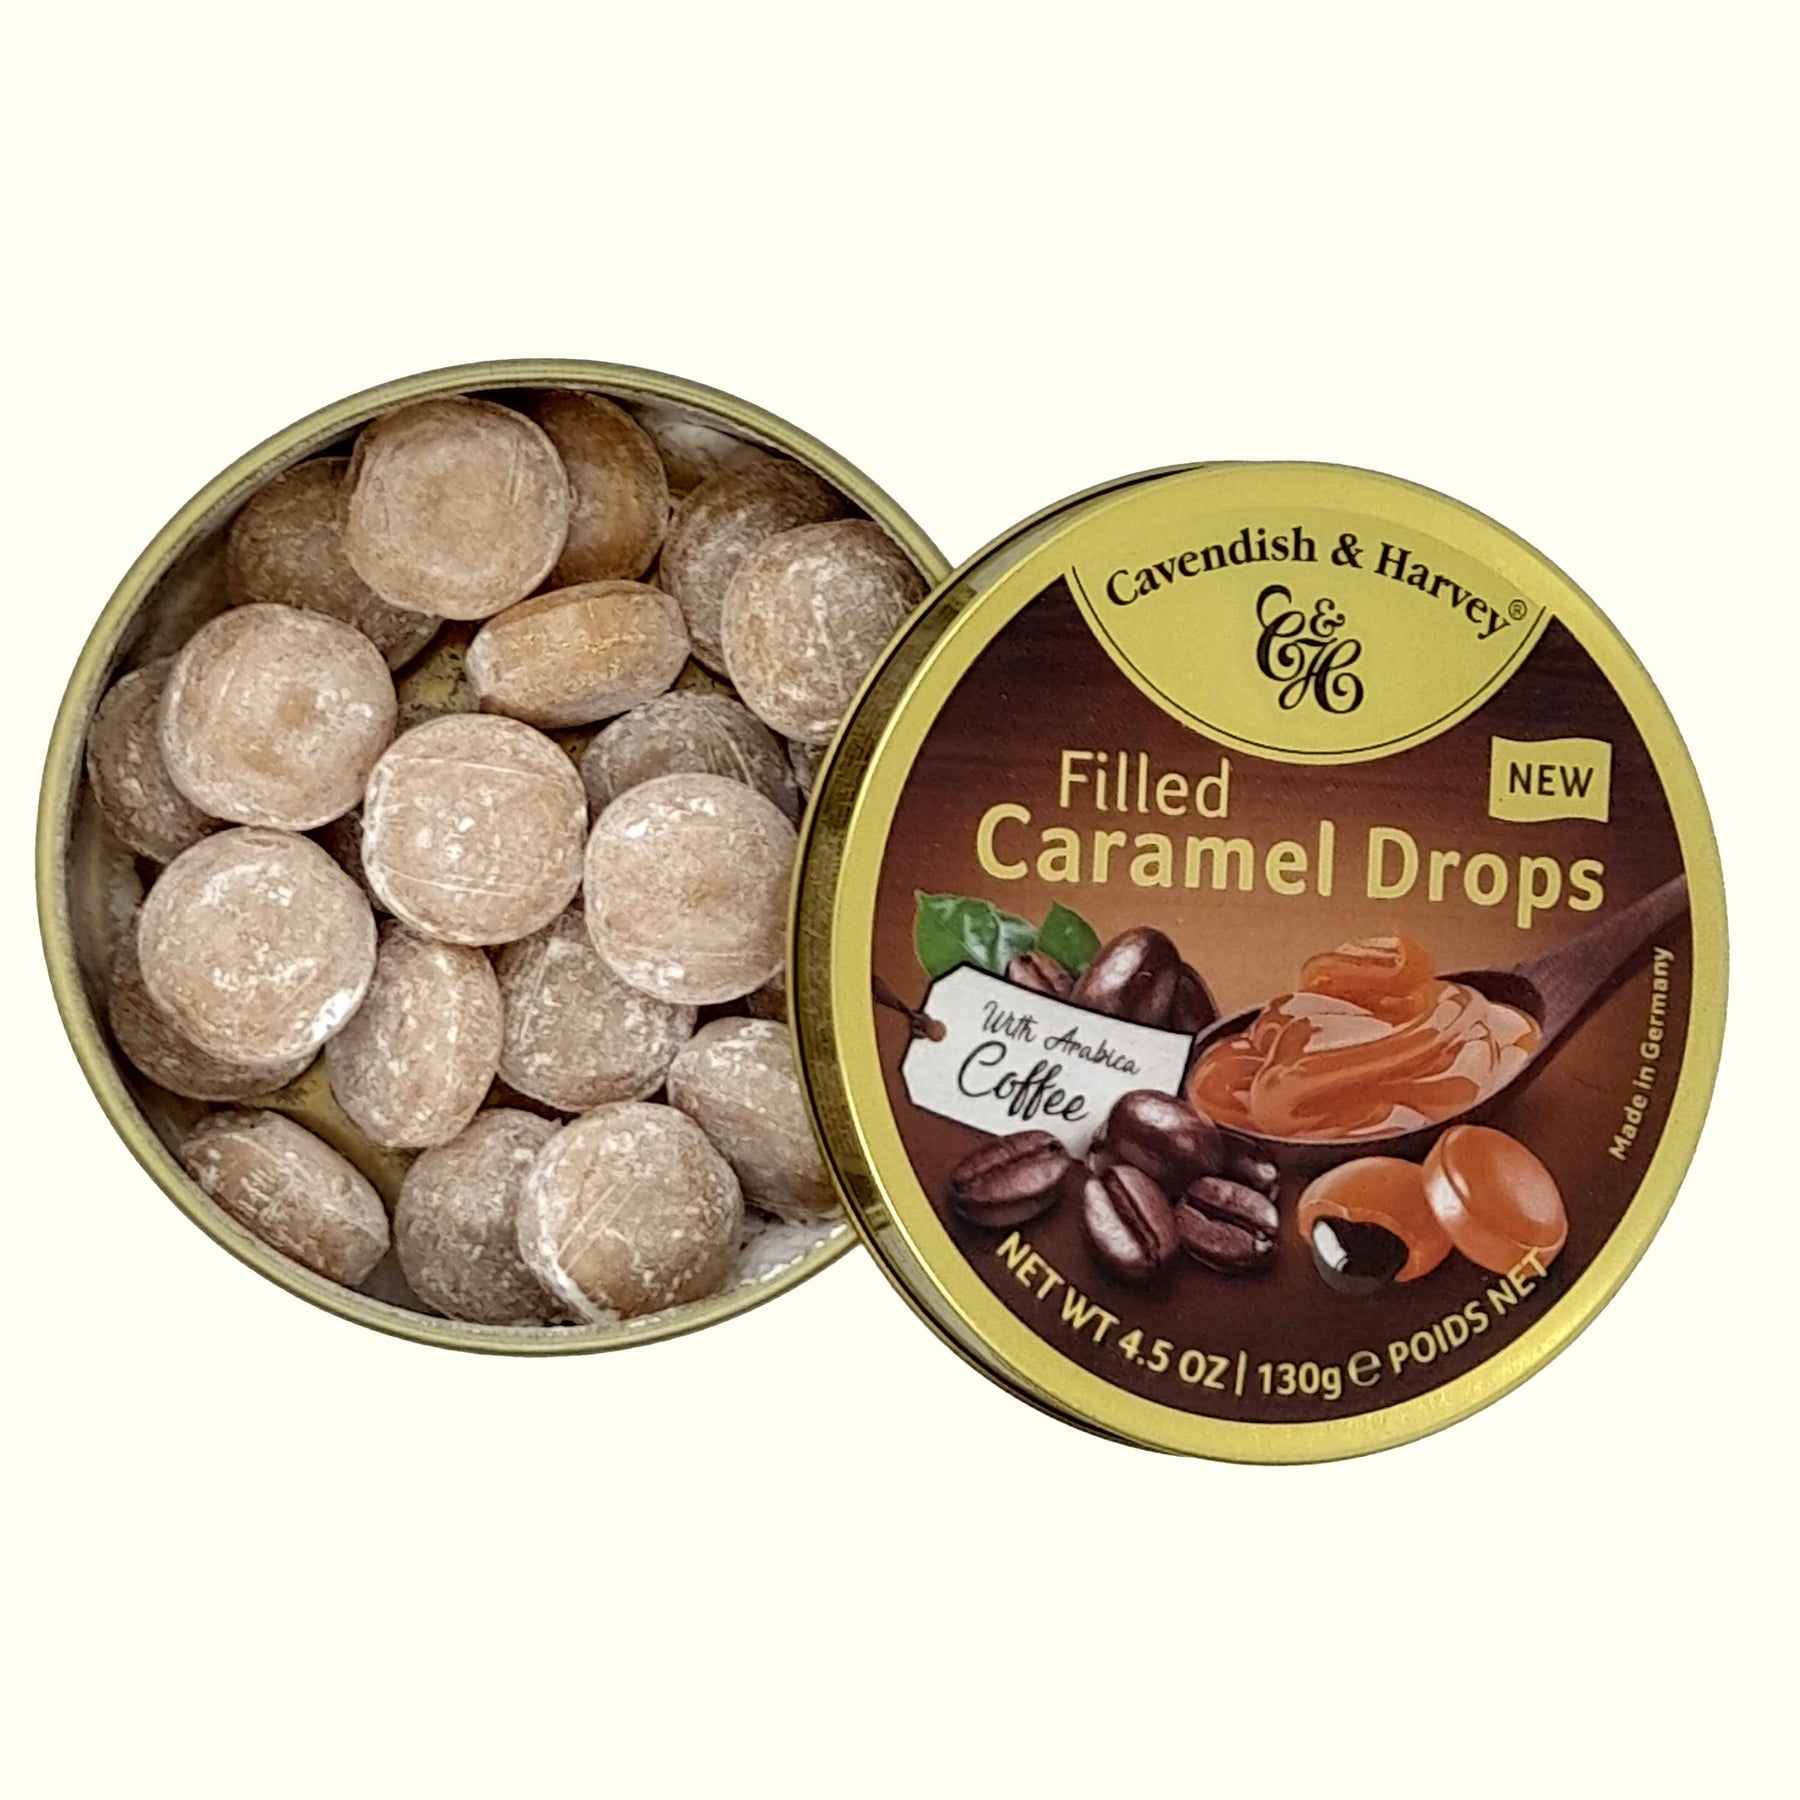 Cavendish & Harvey Filled Caramel Drops With Coffee 130g